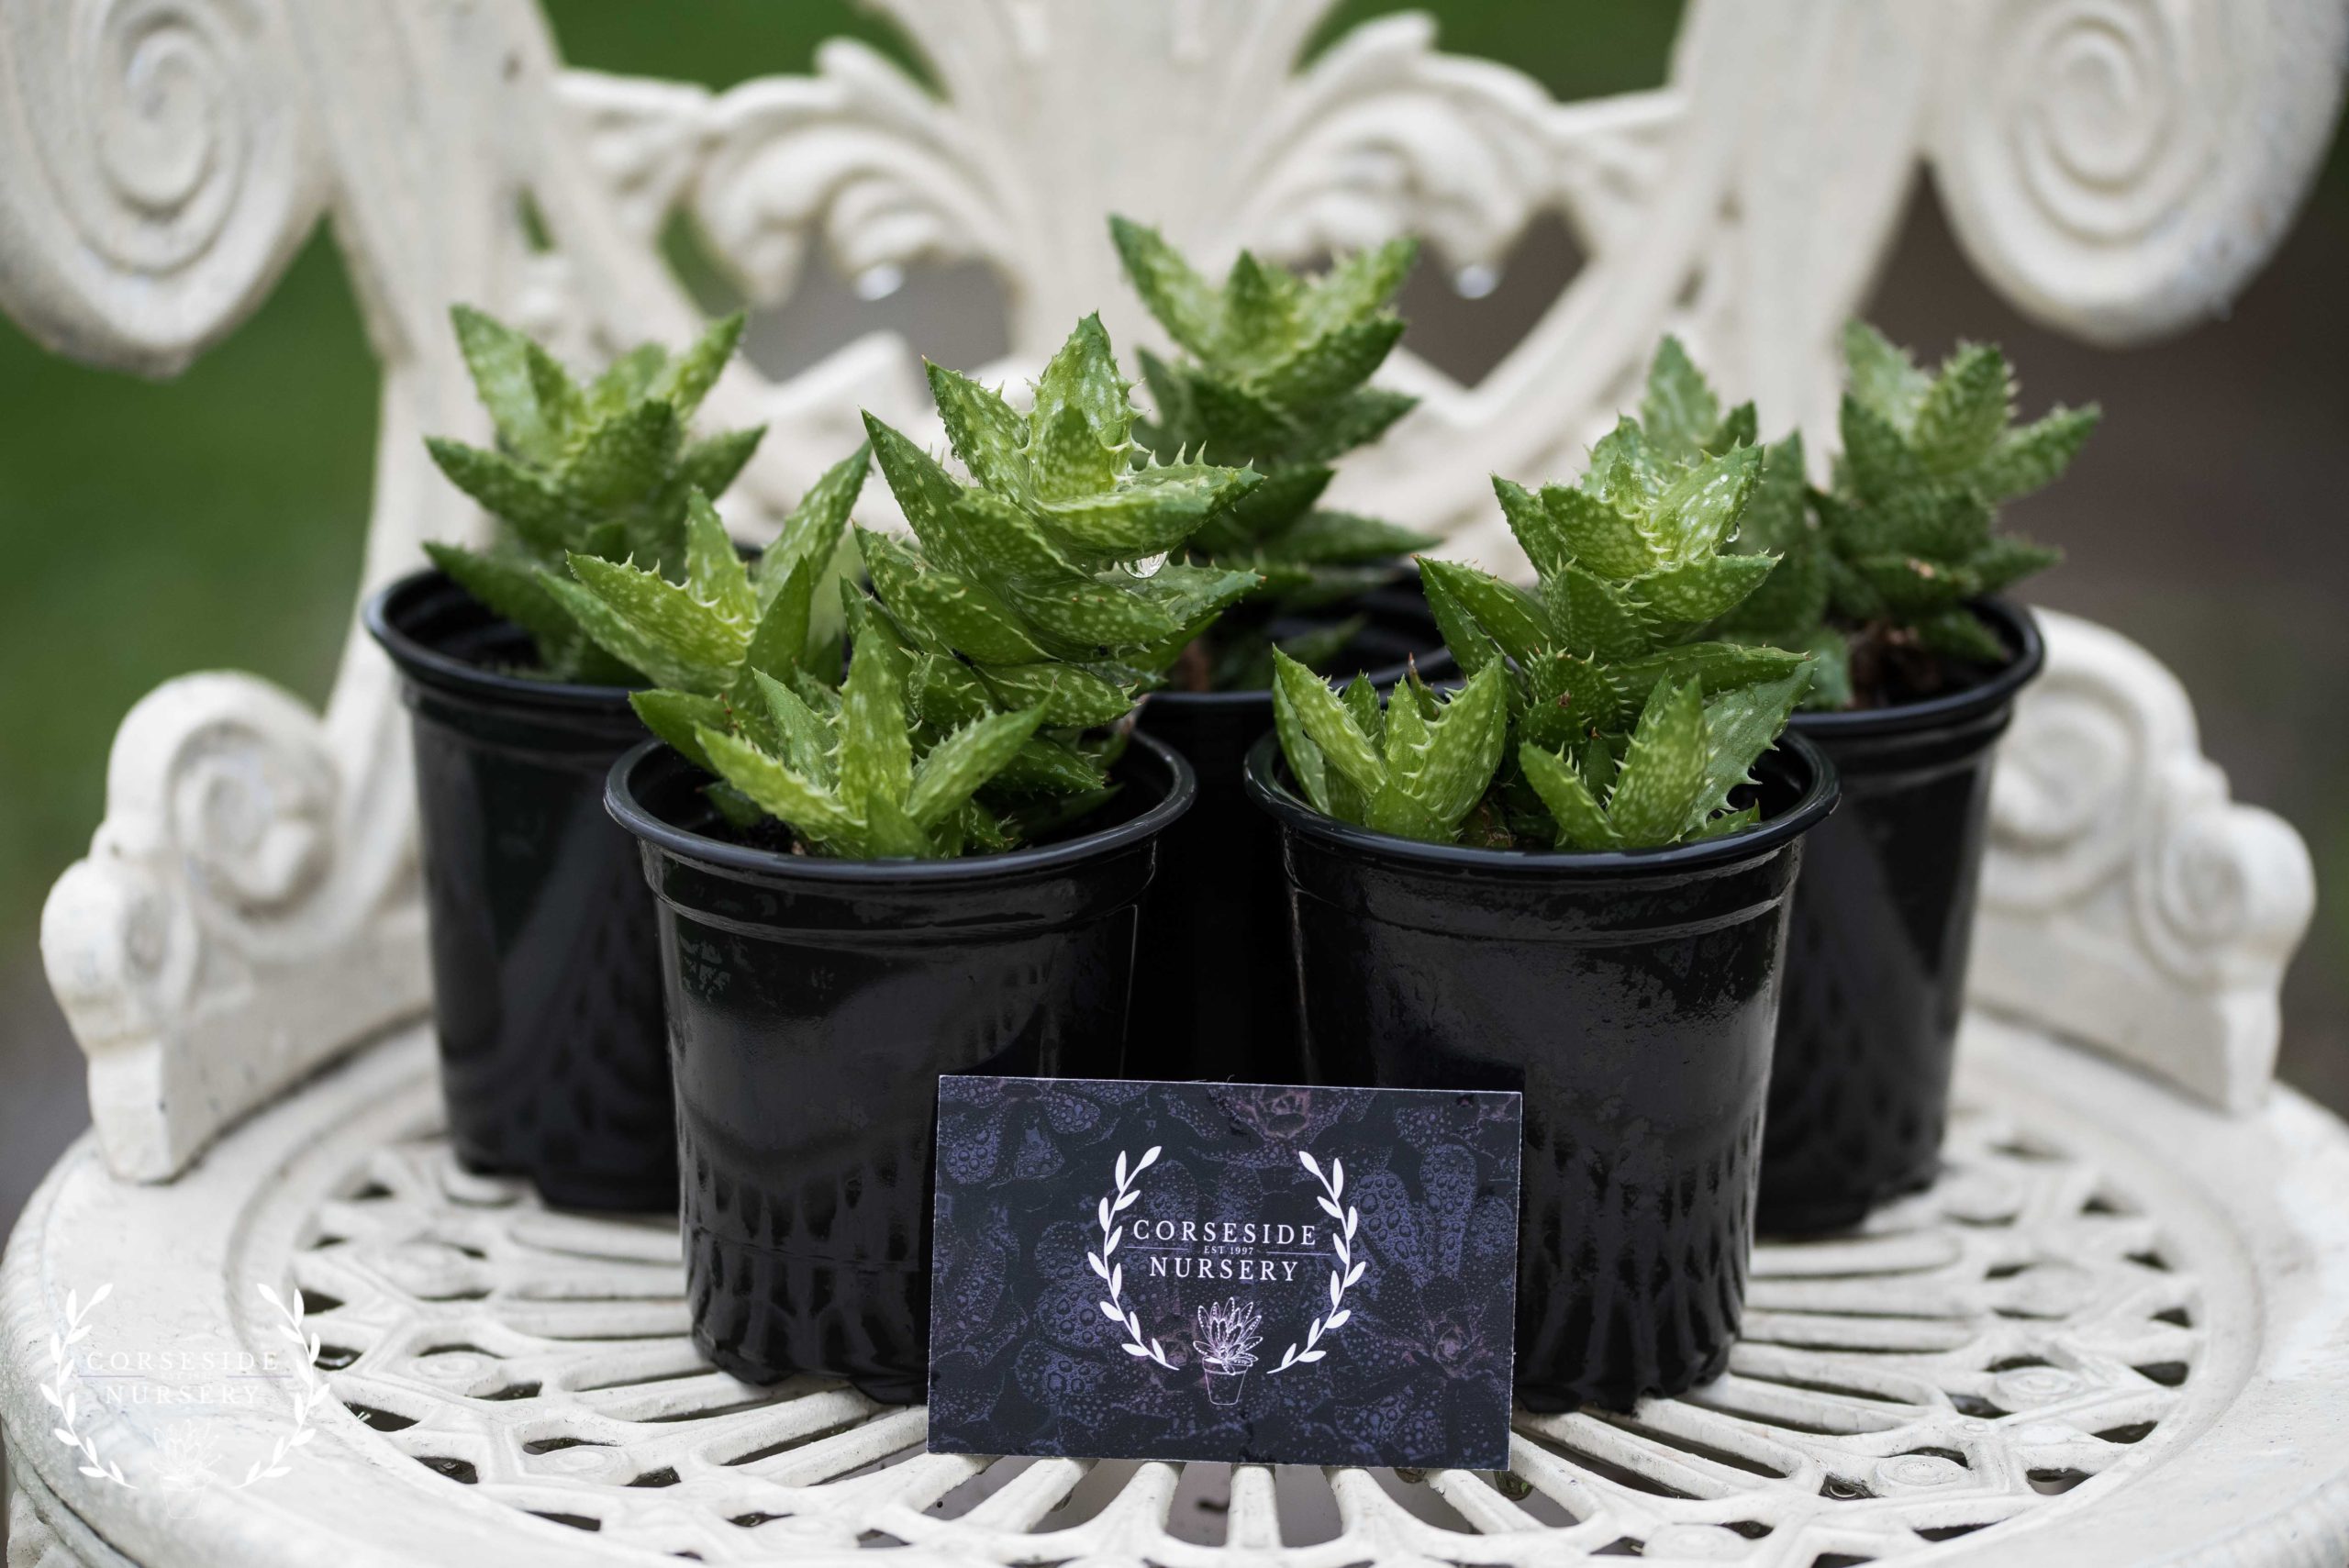 aloe_juvenna_clumping_vera_brevifolia_cornwall_minack_surreal_succulents_spikey_pins_uk_grown_grower_corseside_nursery_buy_plants_online_delivery (3)